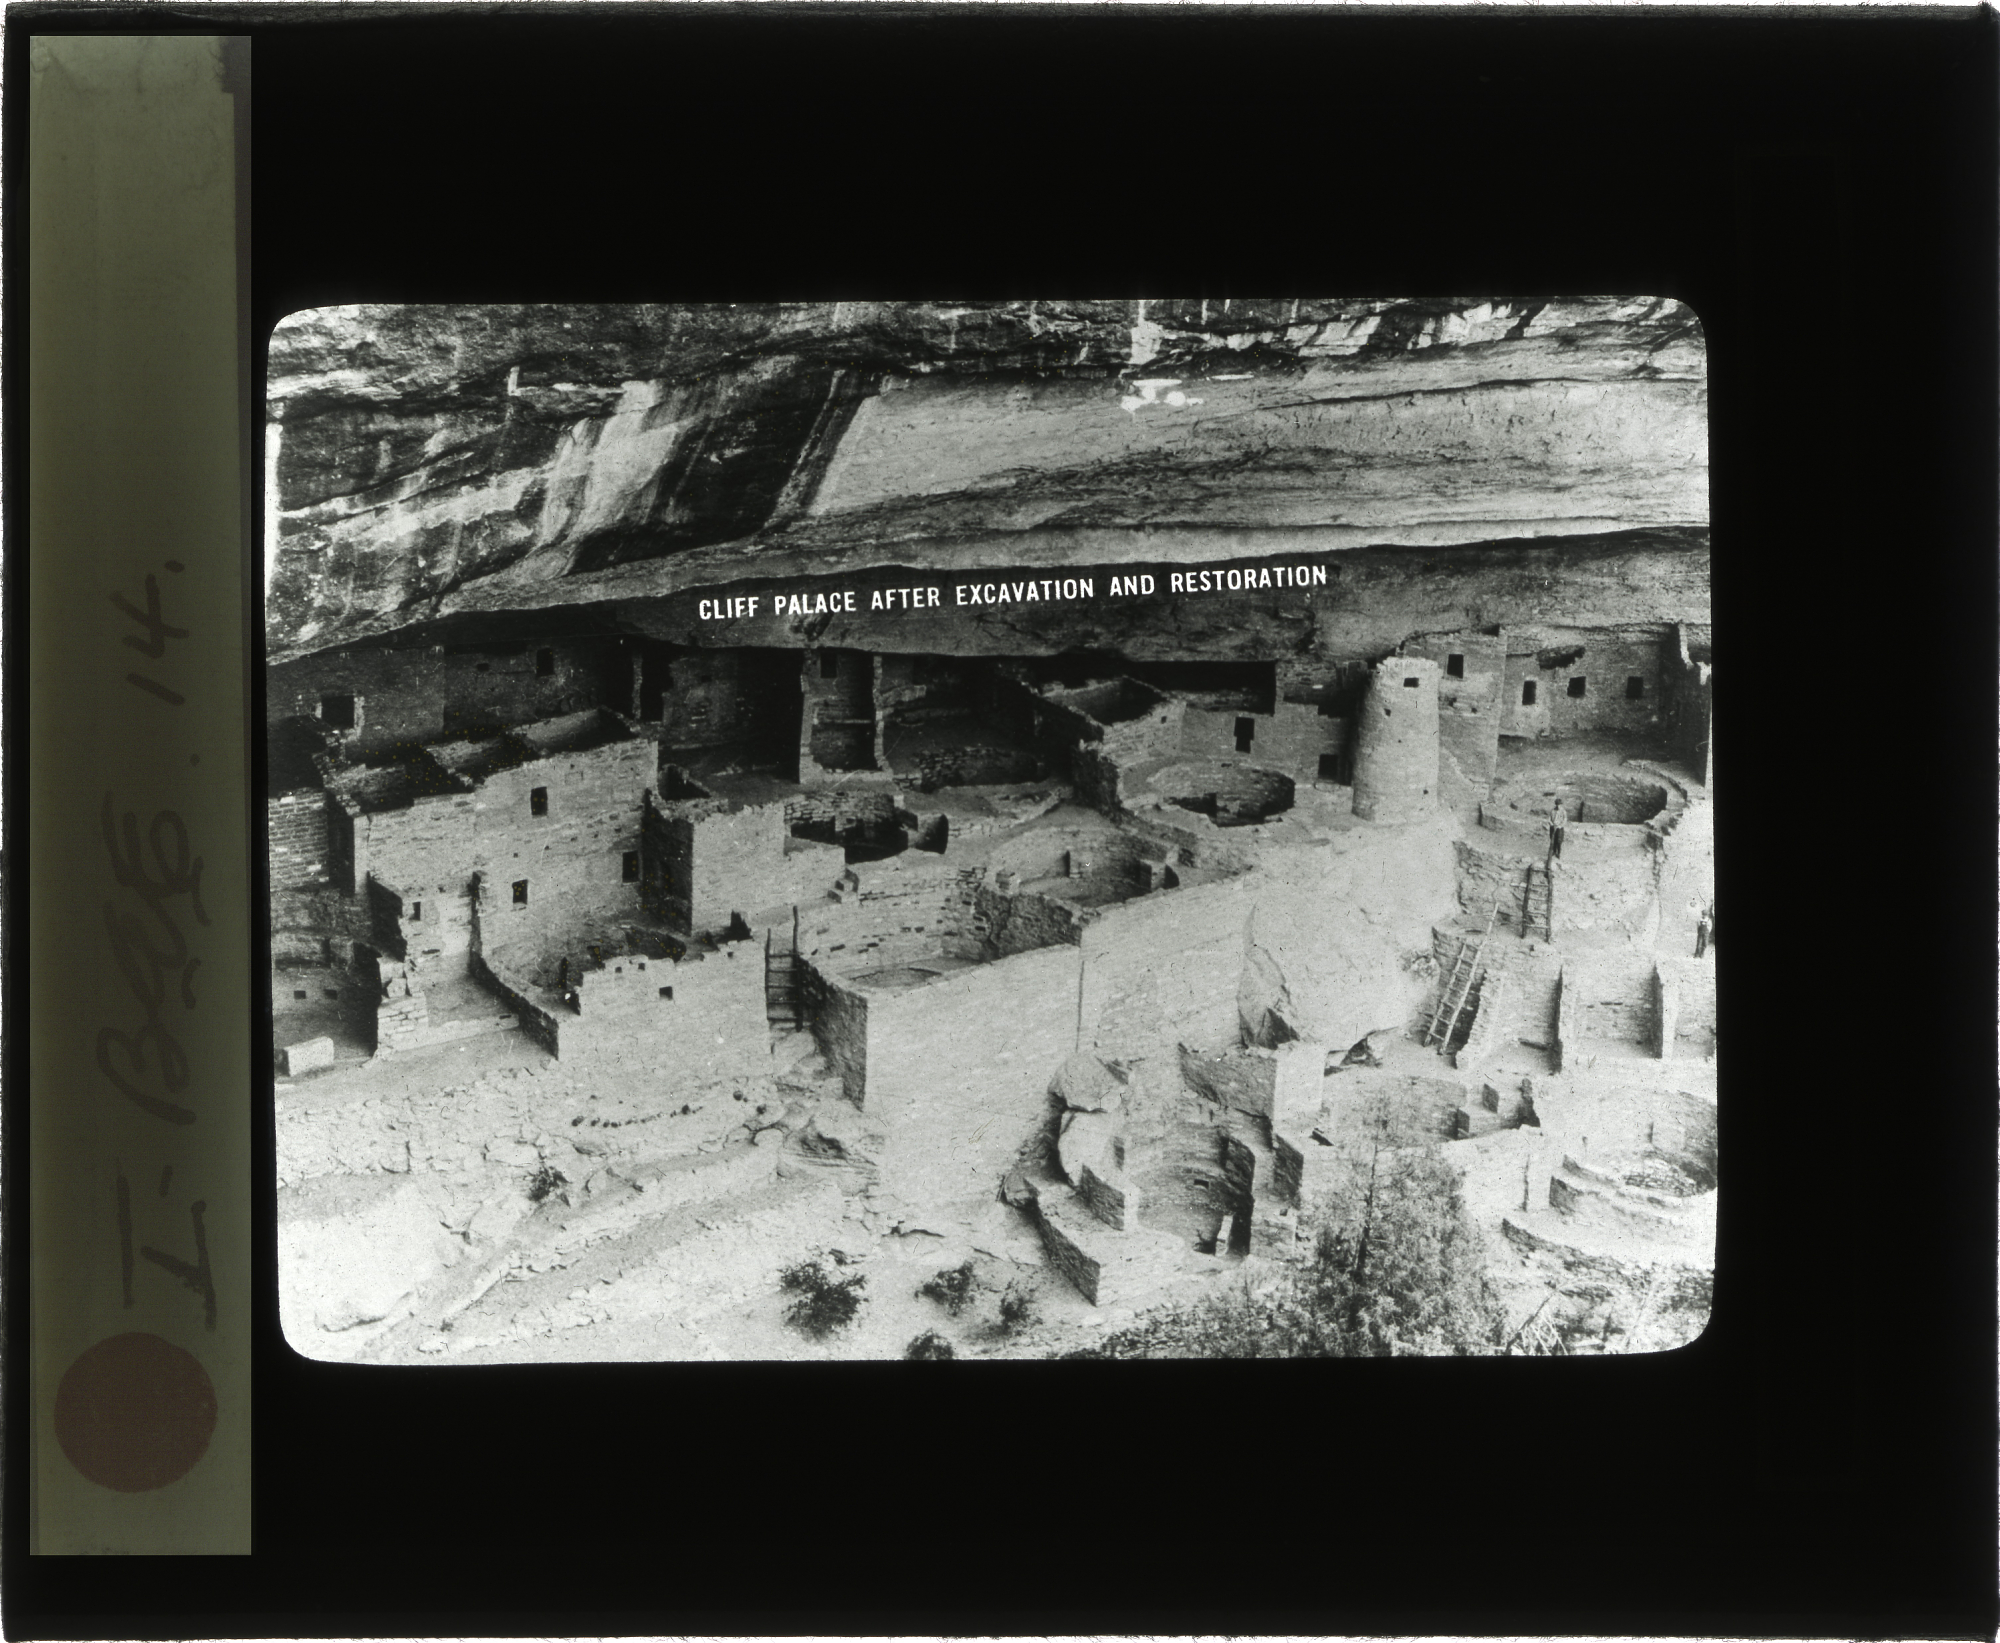 Cliff Palace in Mesa Verde National Park, after excavation and repair by the Smithsonian's Bureau of